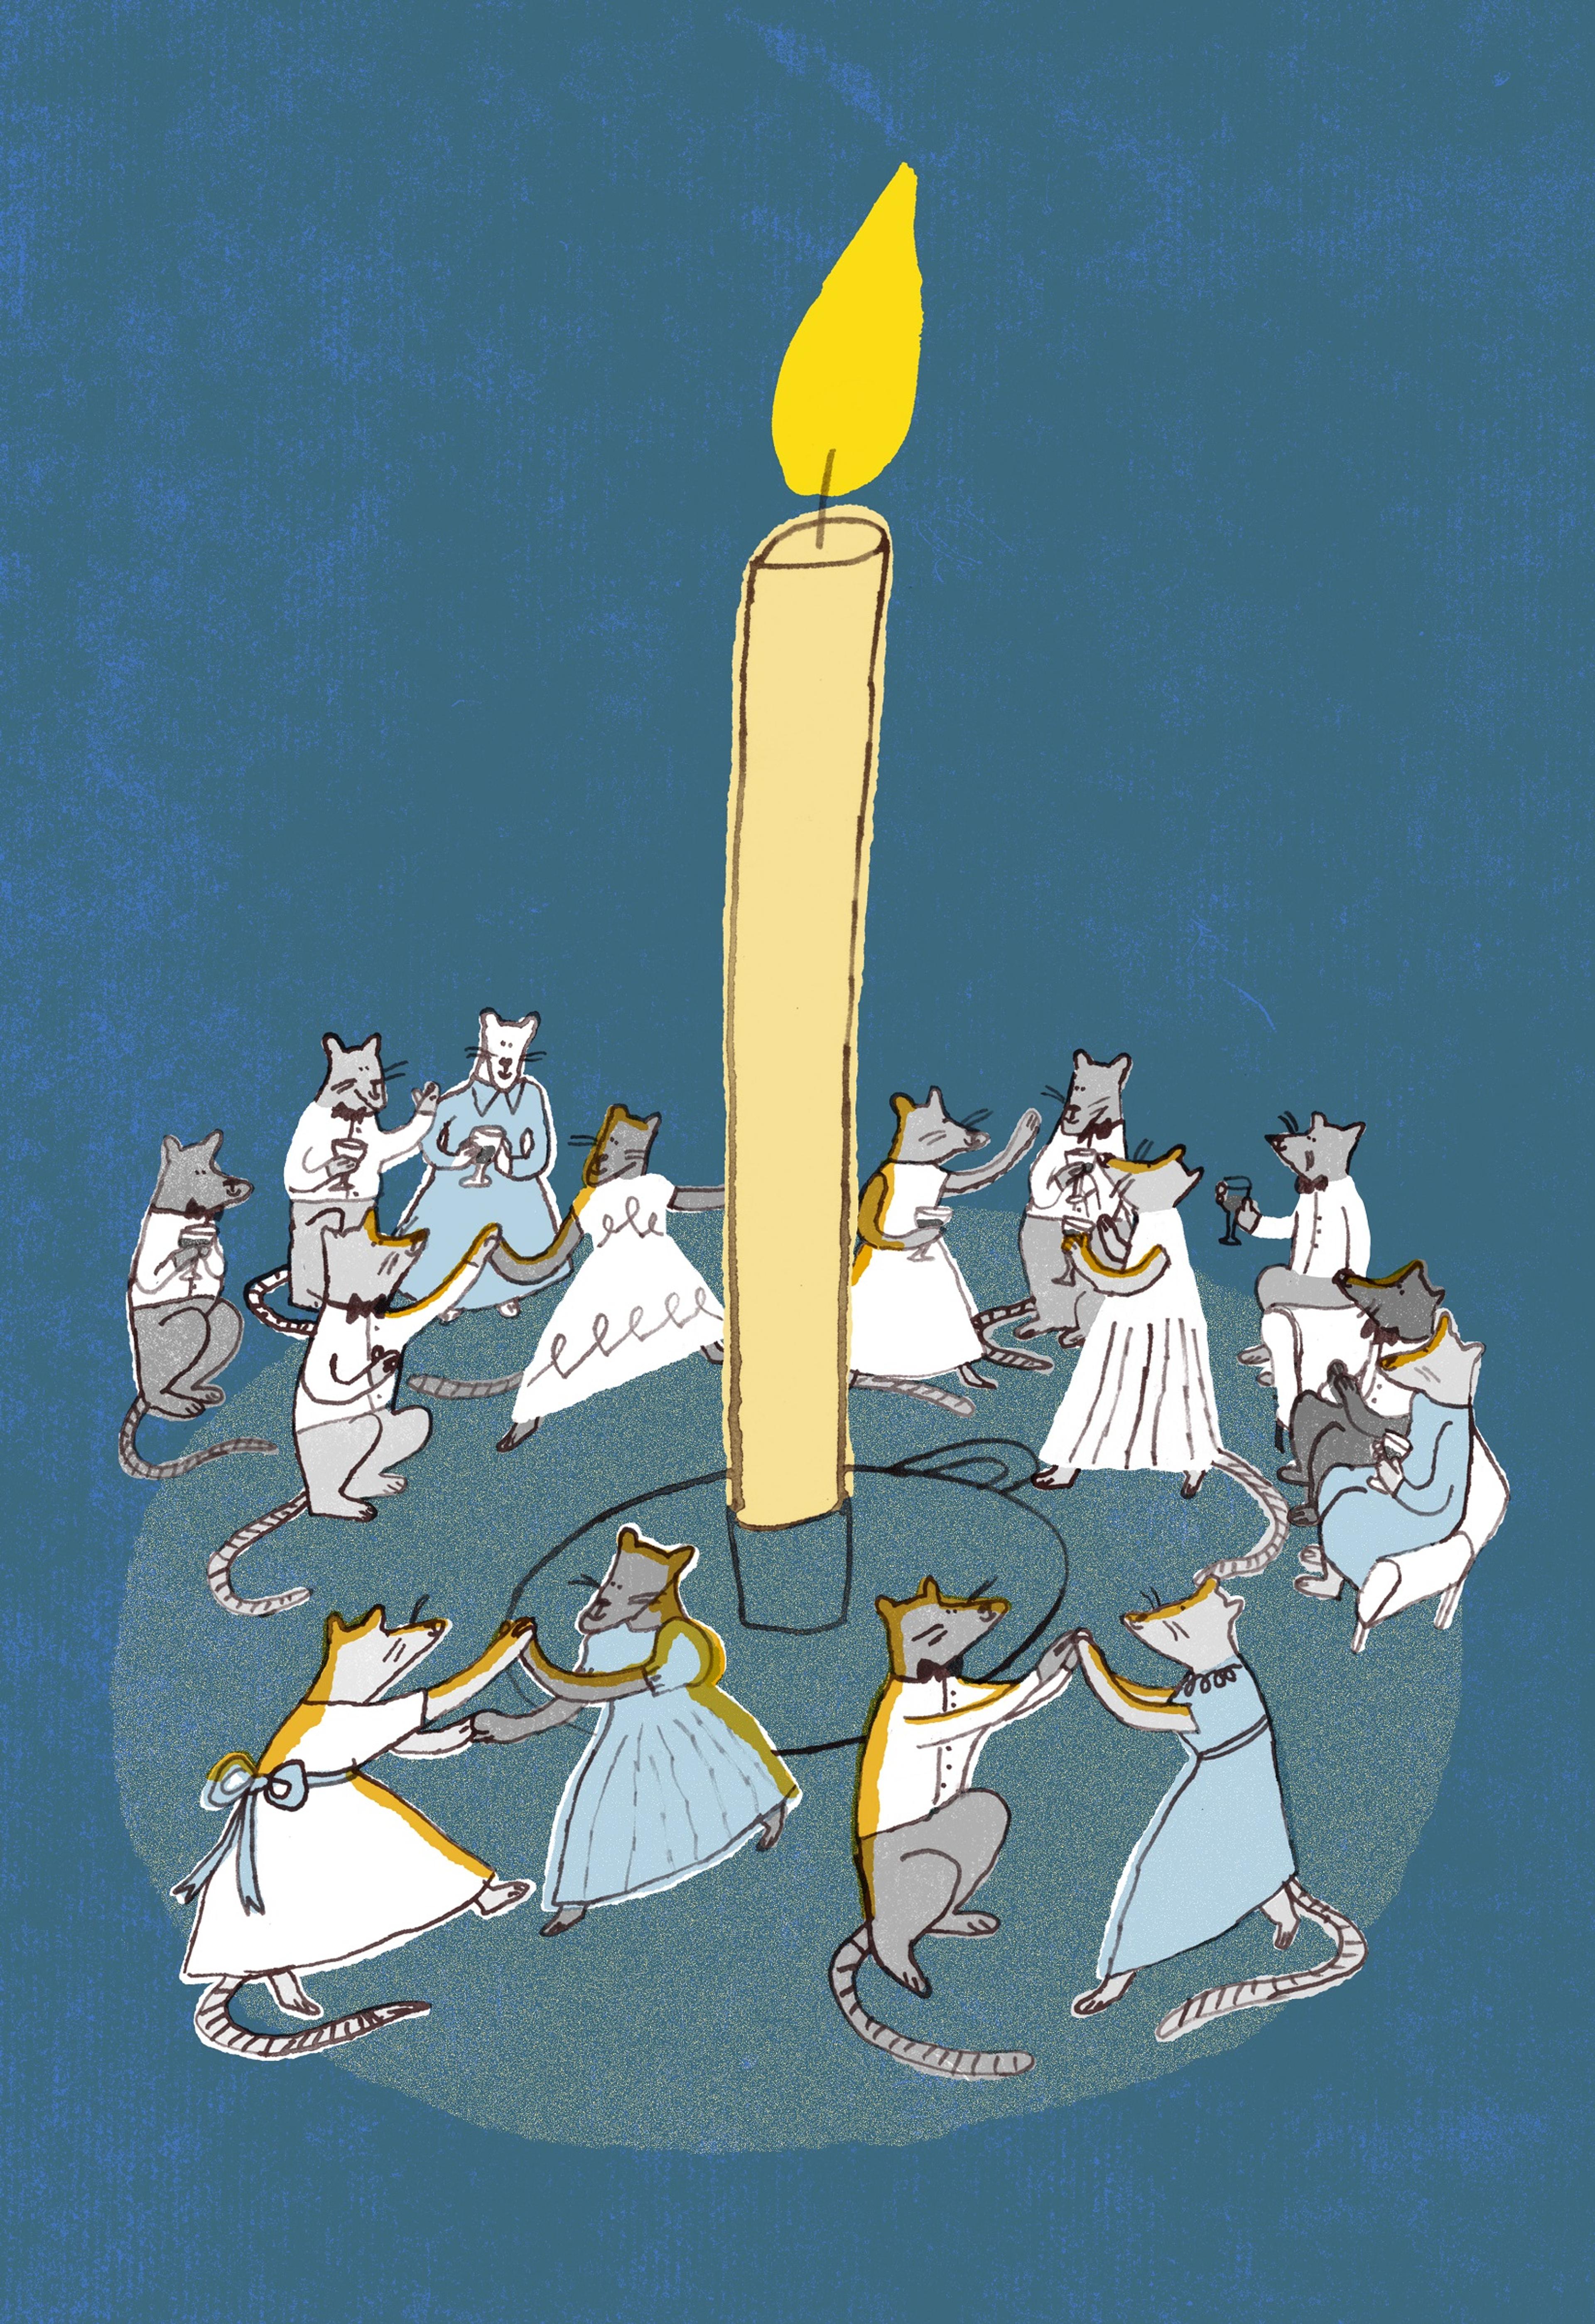 Illustration of mice dancing around a candle